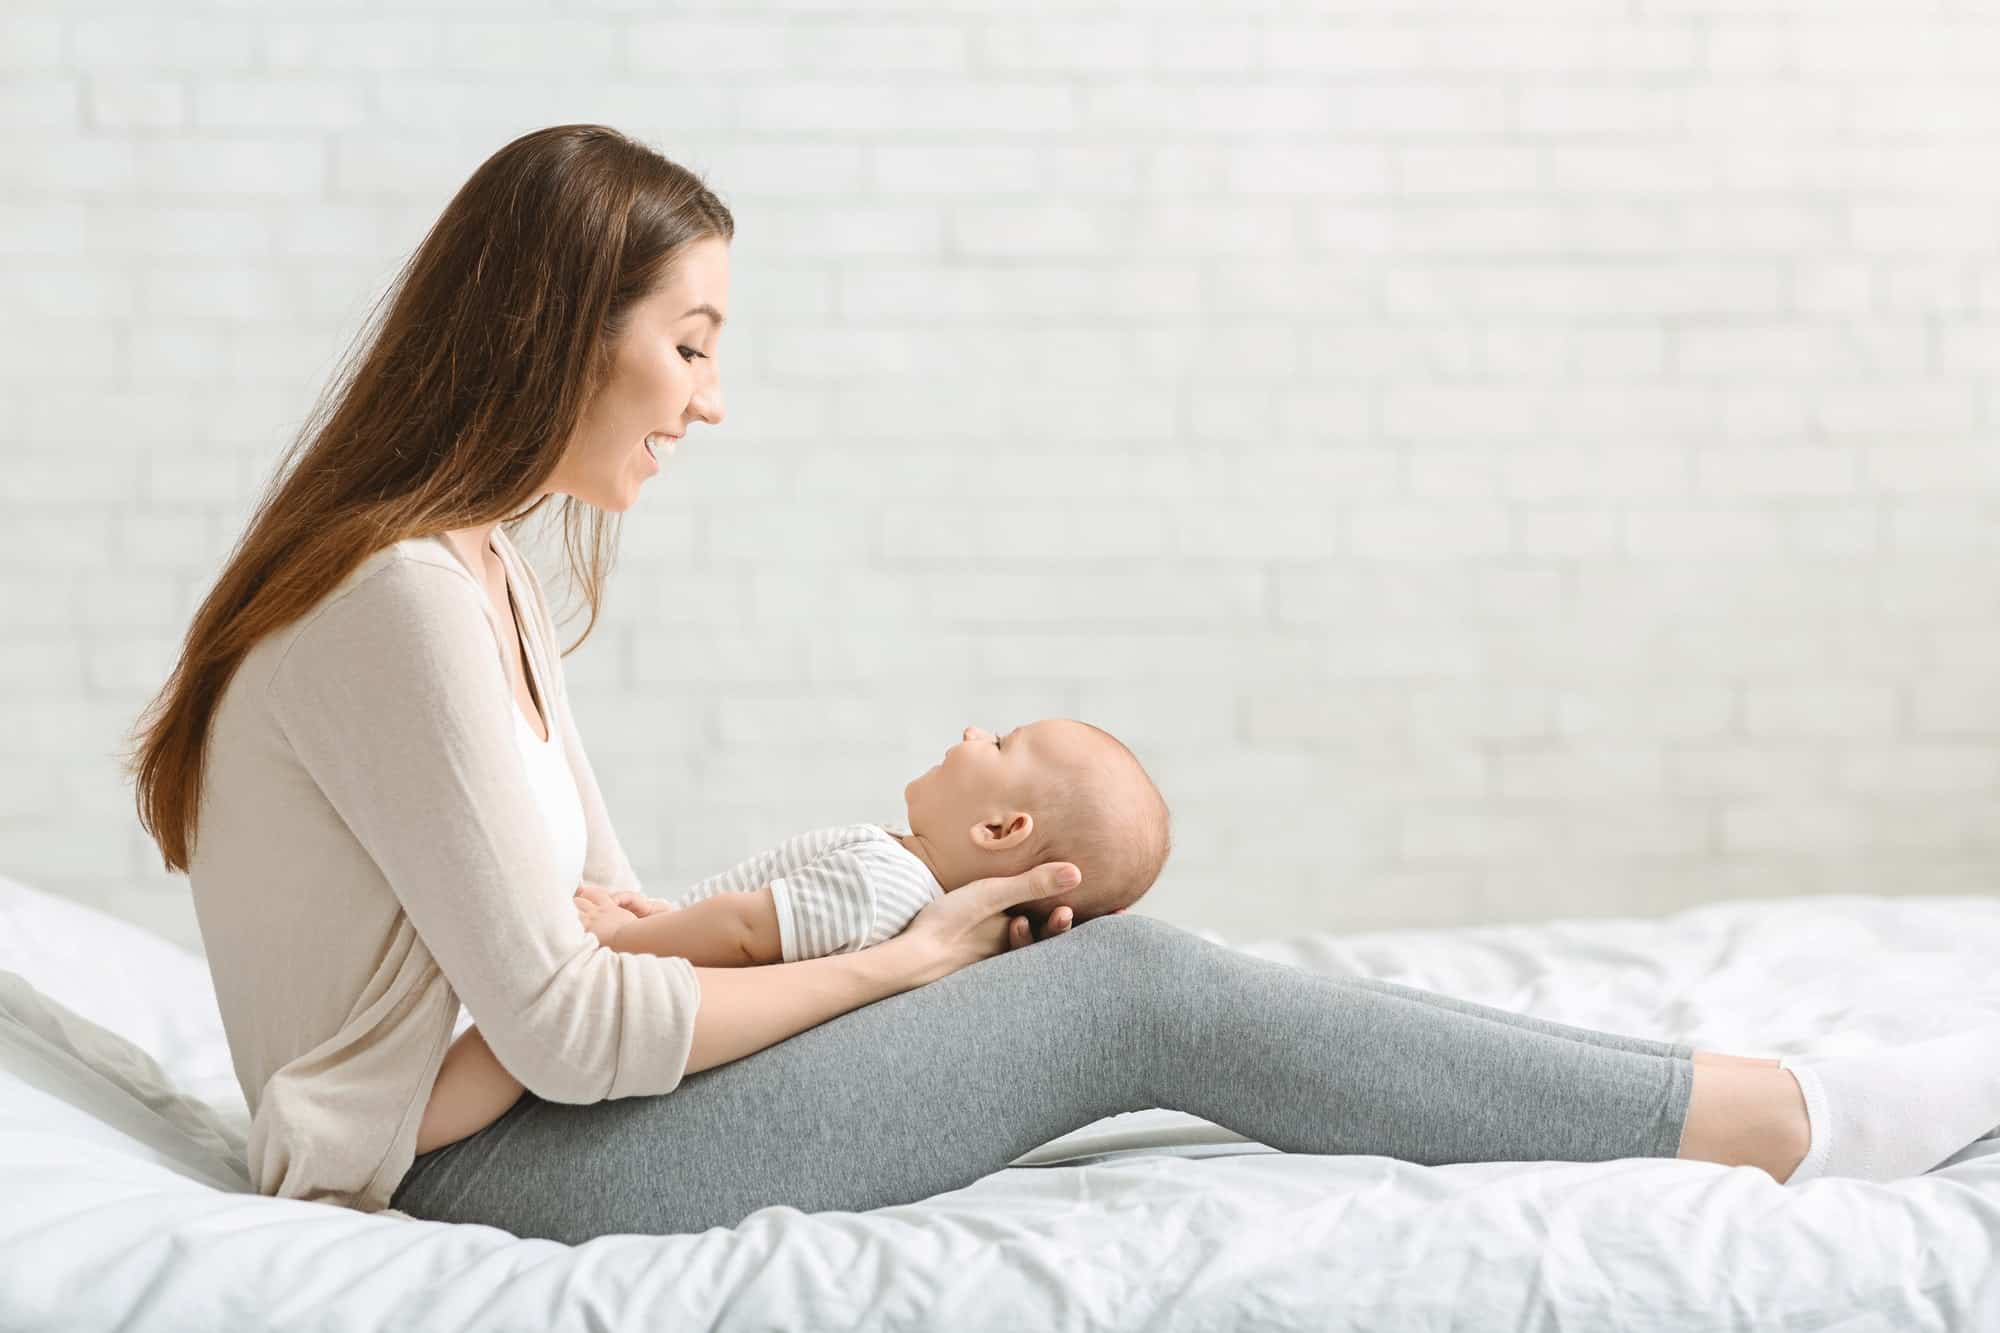 Home Birth; Is It the Right Choice for Me?